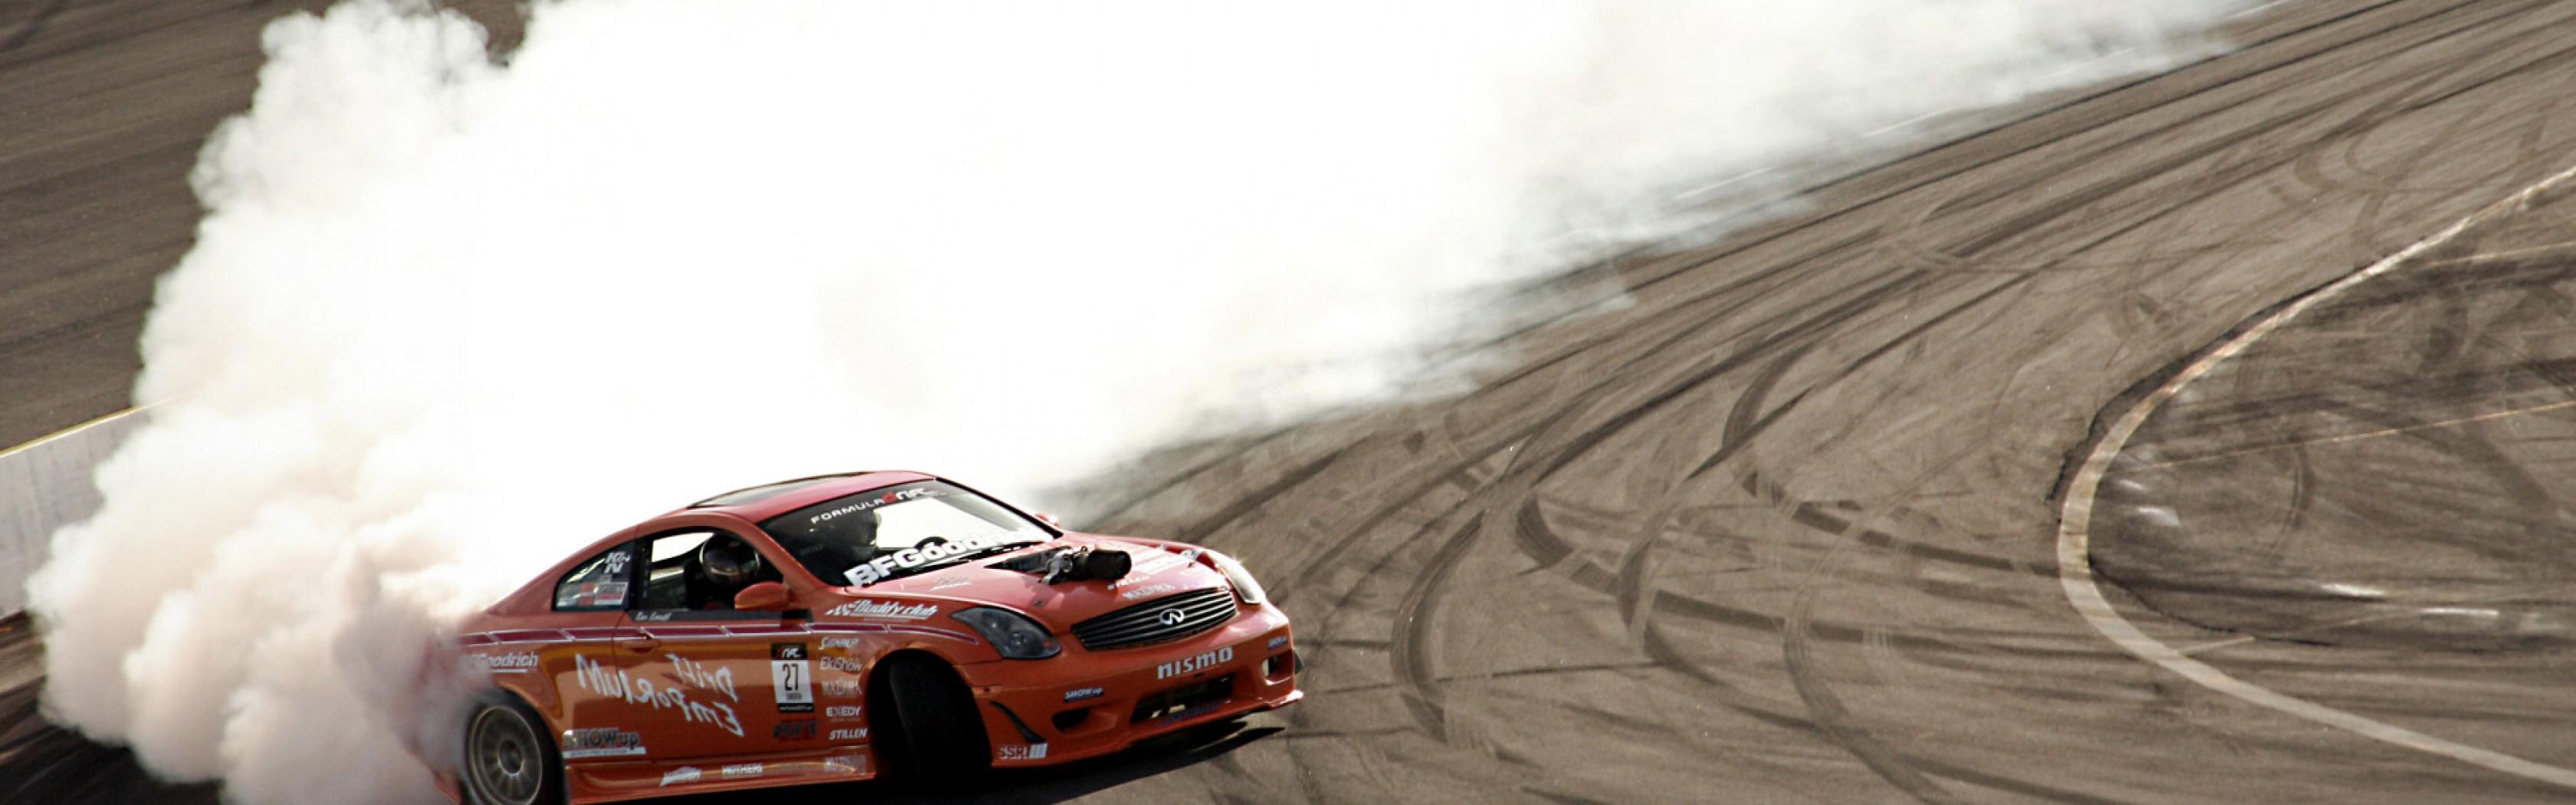 Does someone have a dual monitor wallpaper of a drifting car